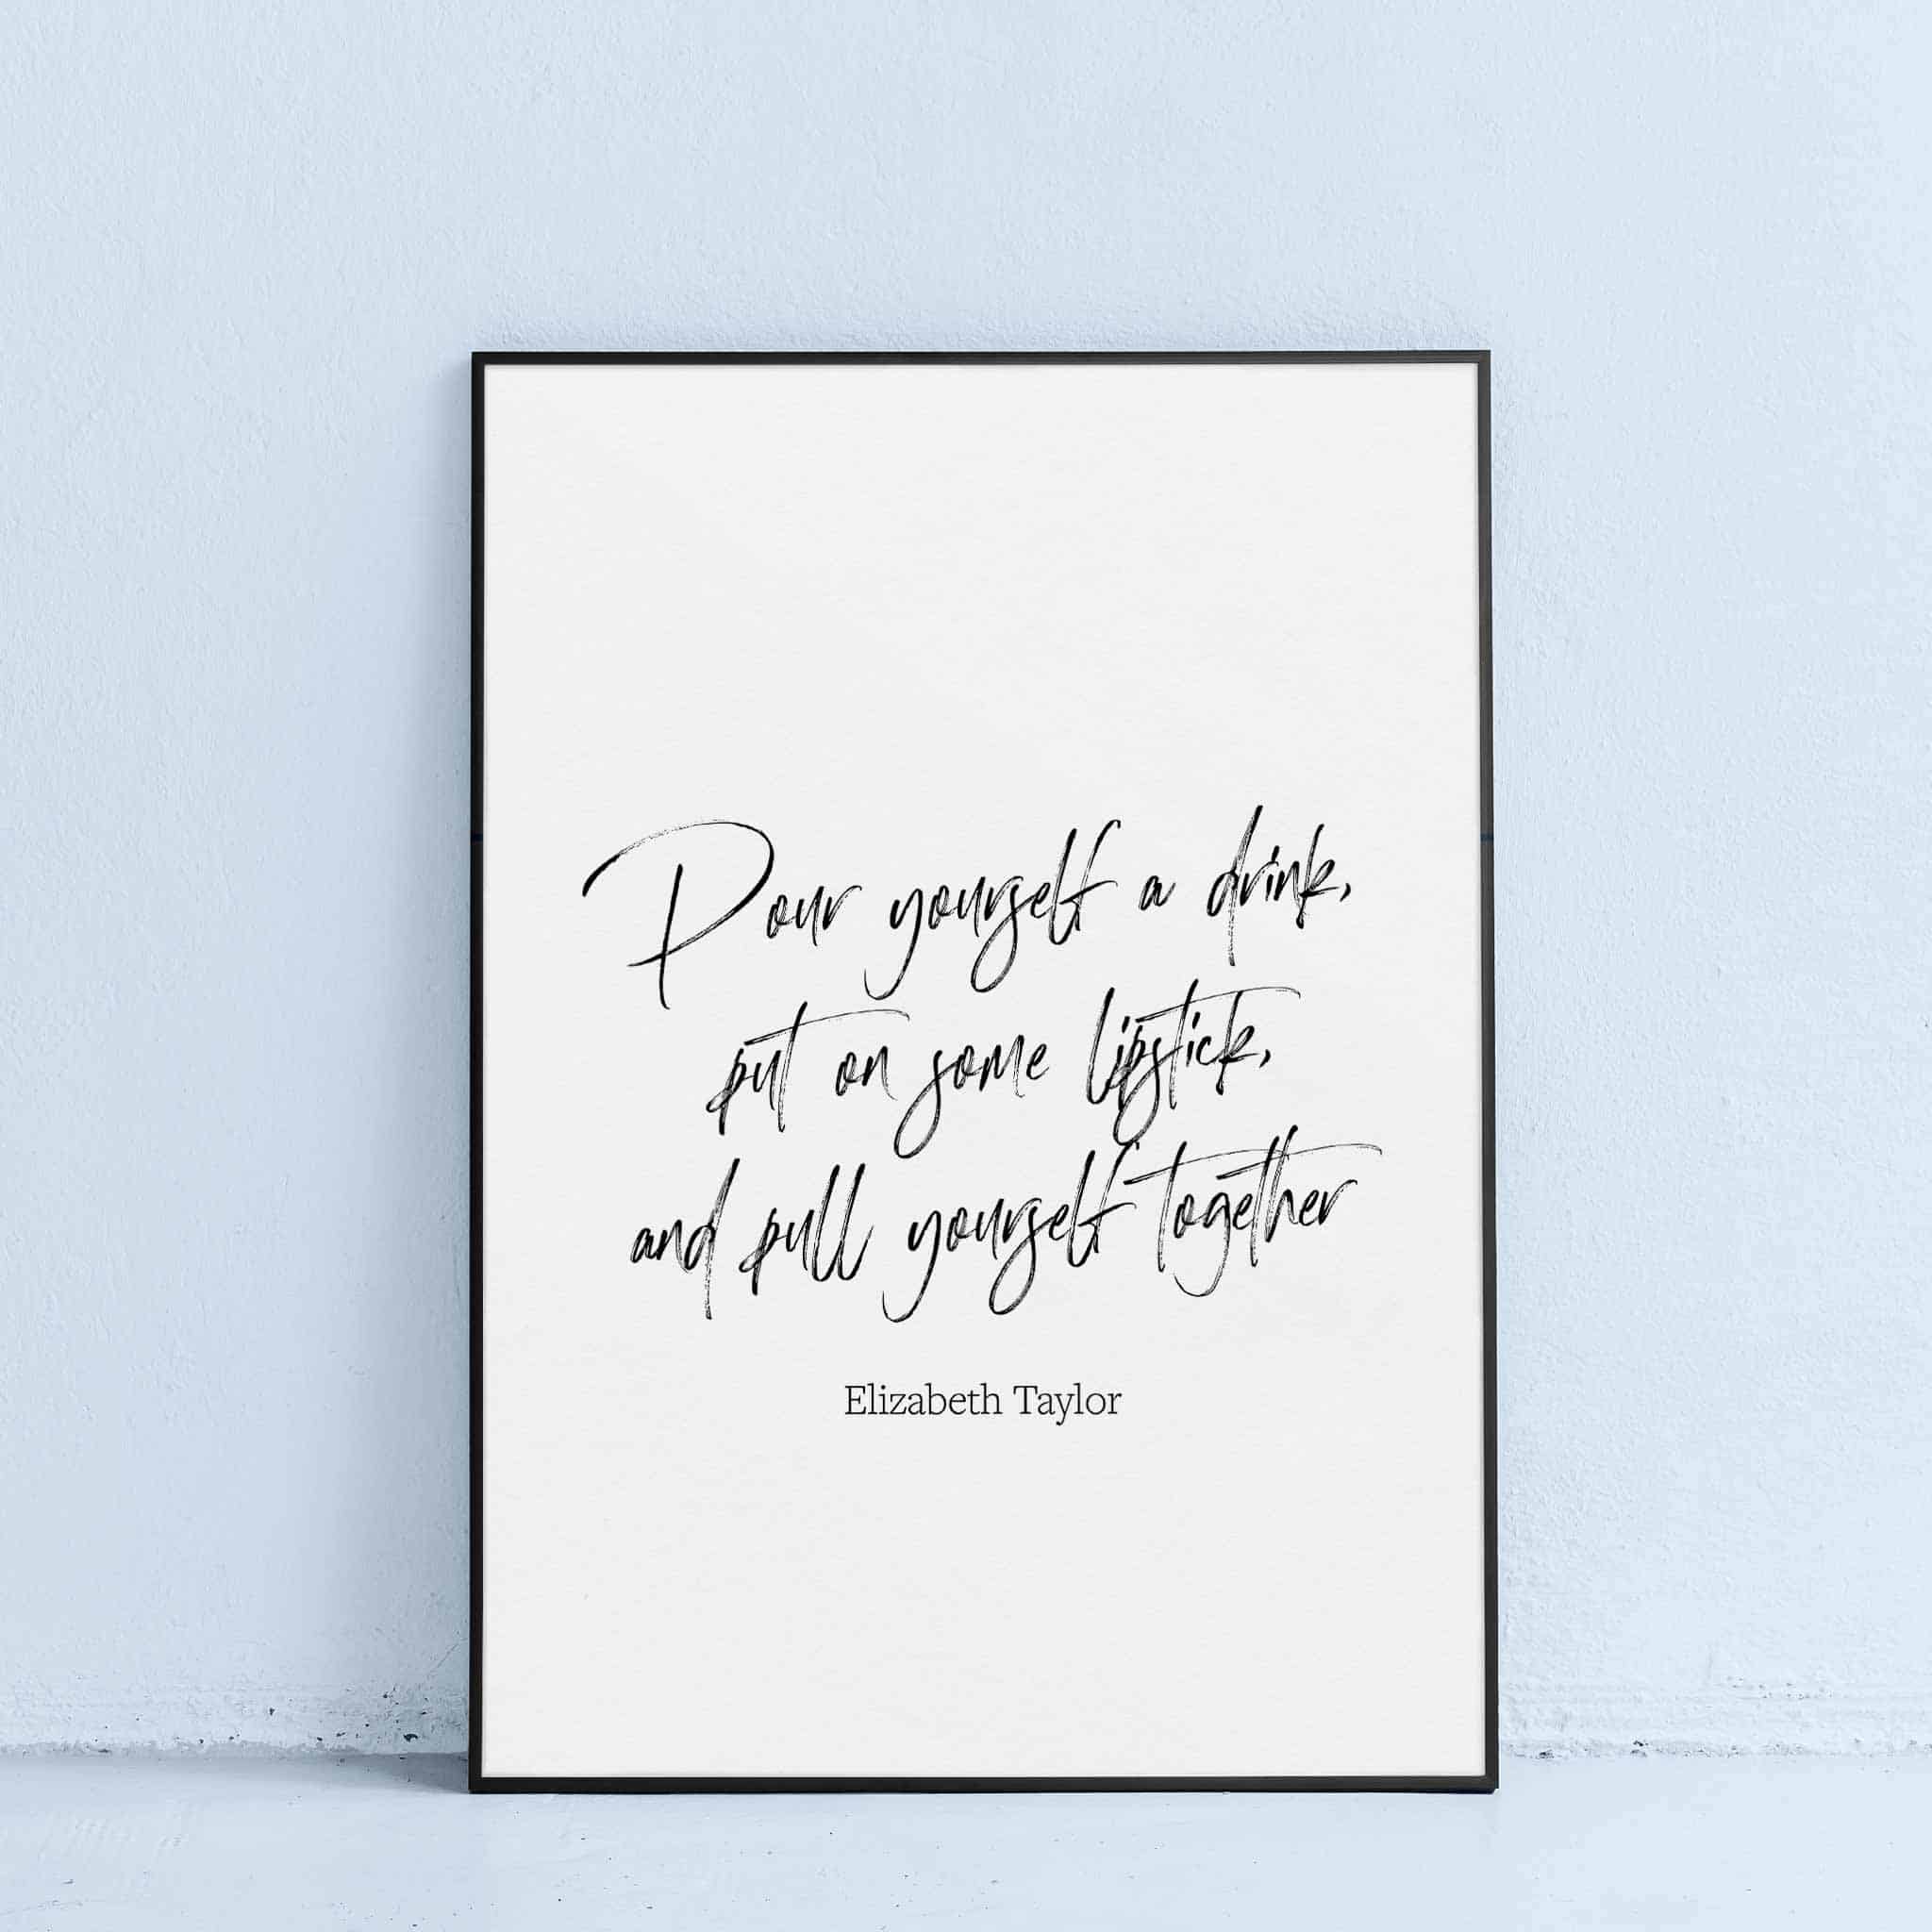 printable wall art quote pull yourself together elizabeth taylor